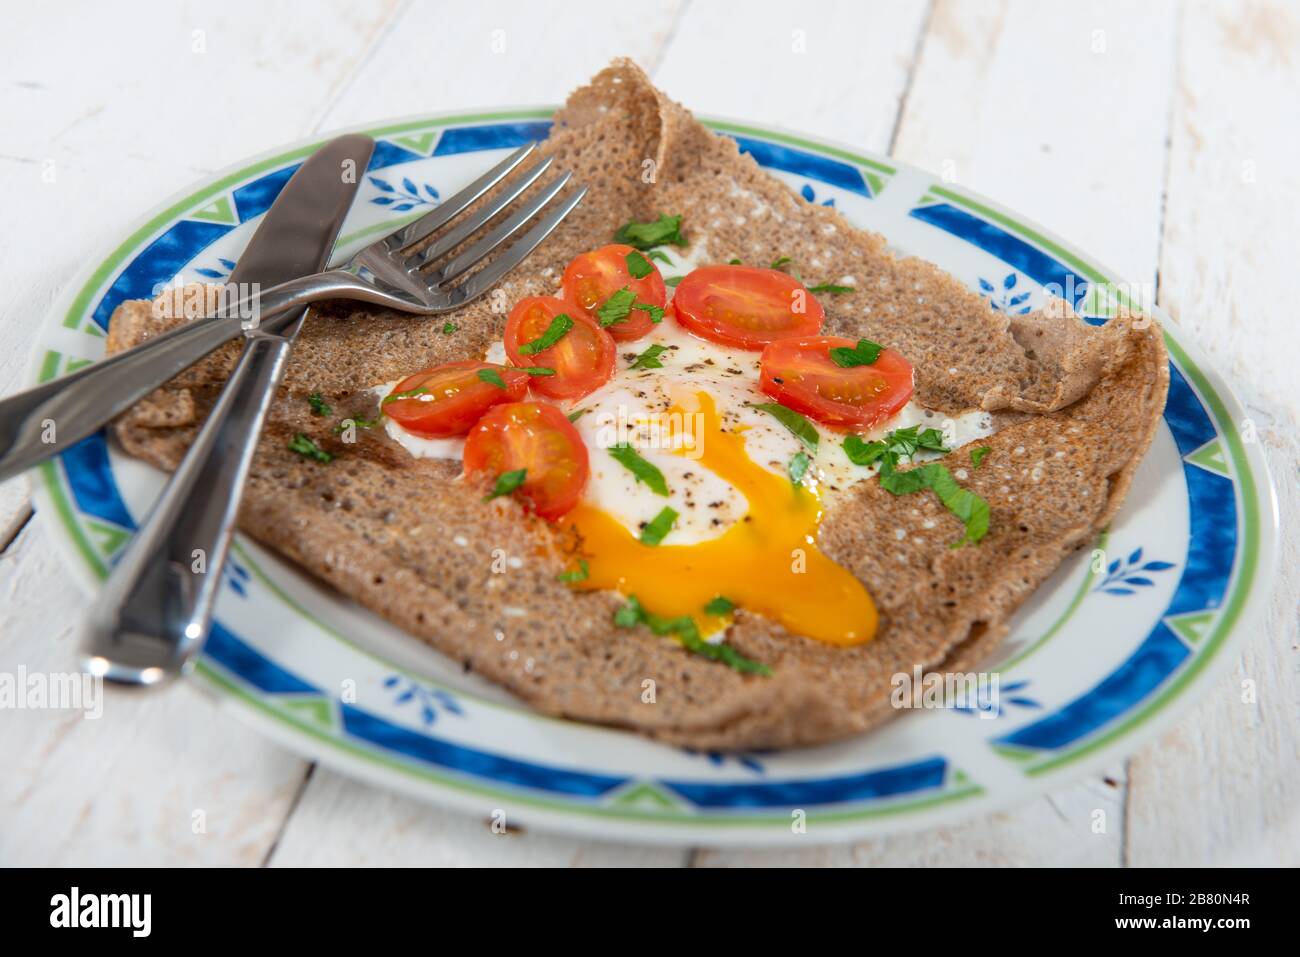 a Breton crepe with egg and tomatoes Stock Photo